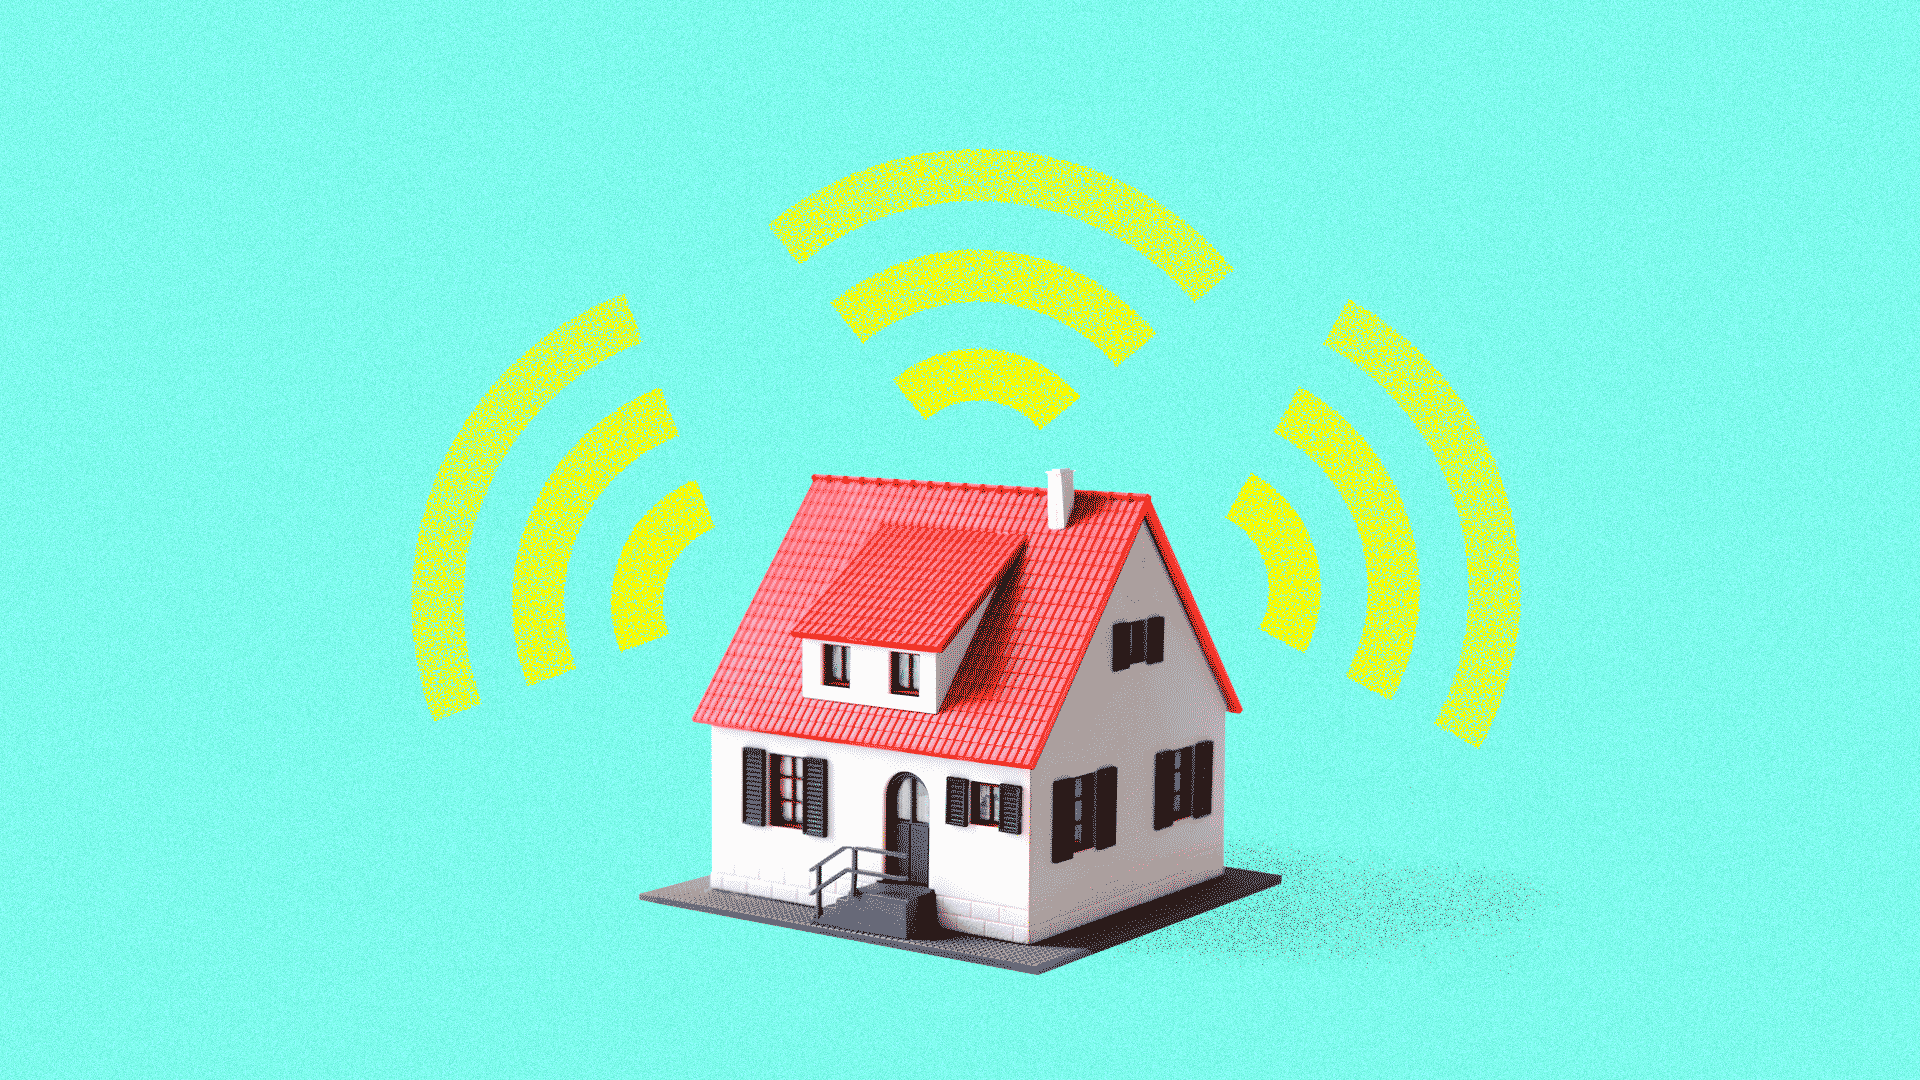 An illustration of a home radiating with wireless signals